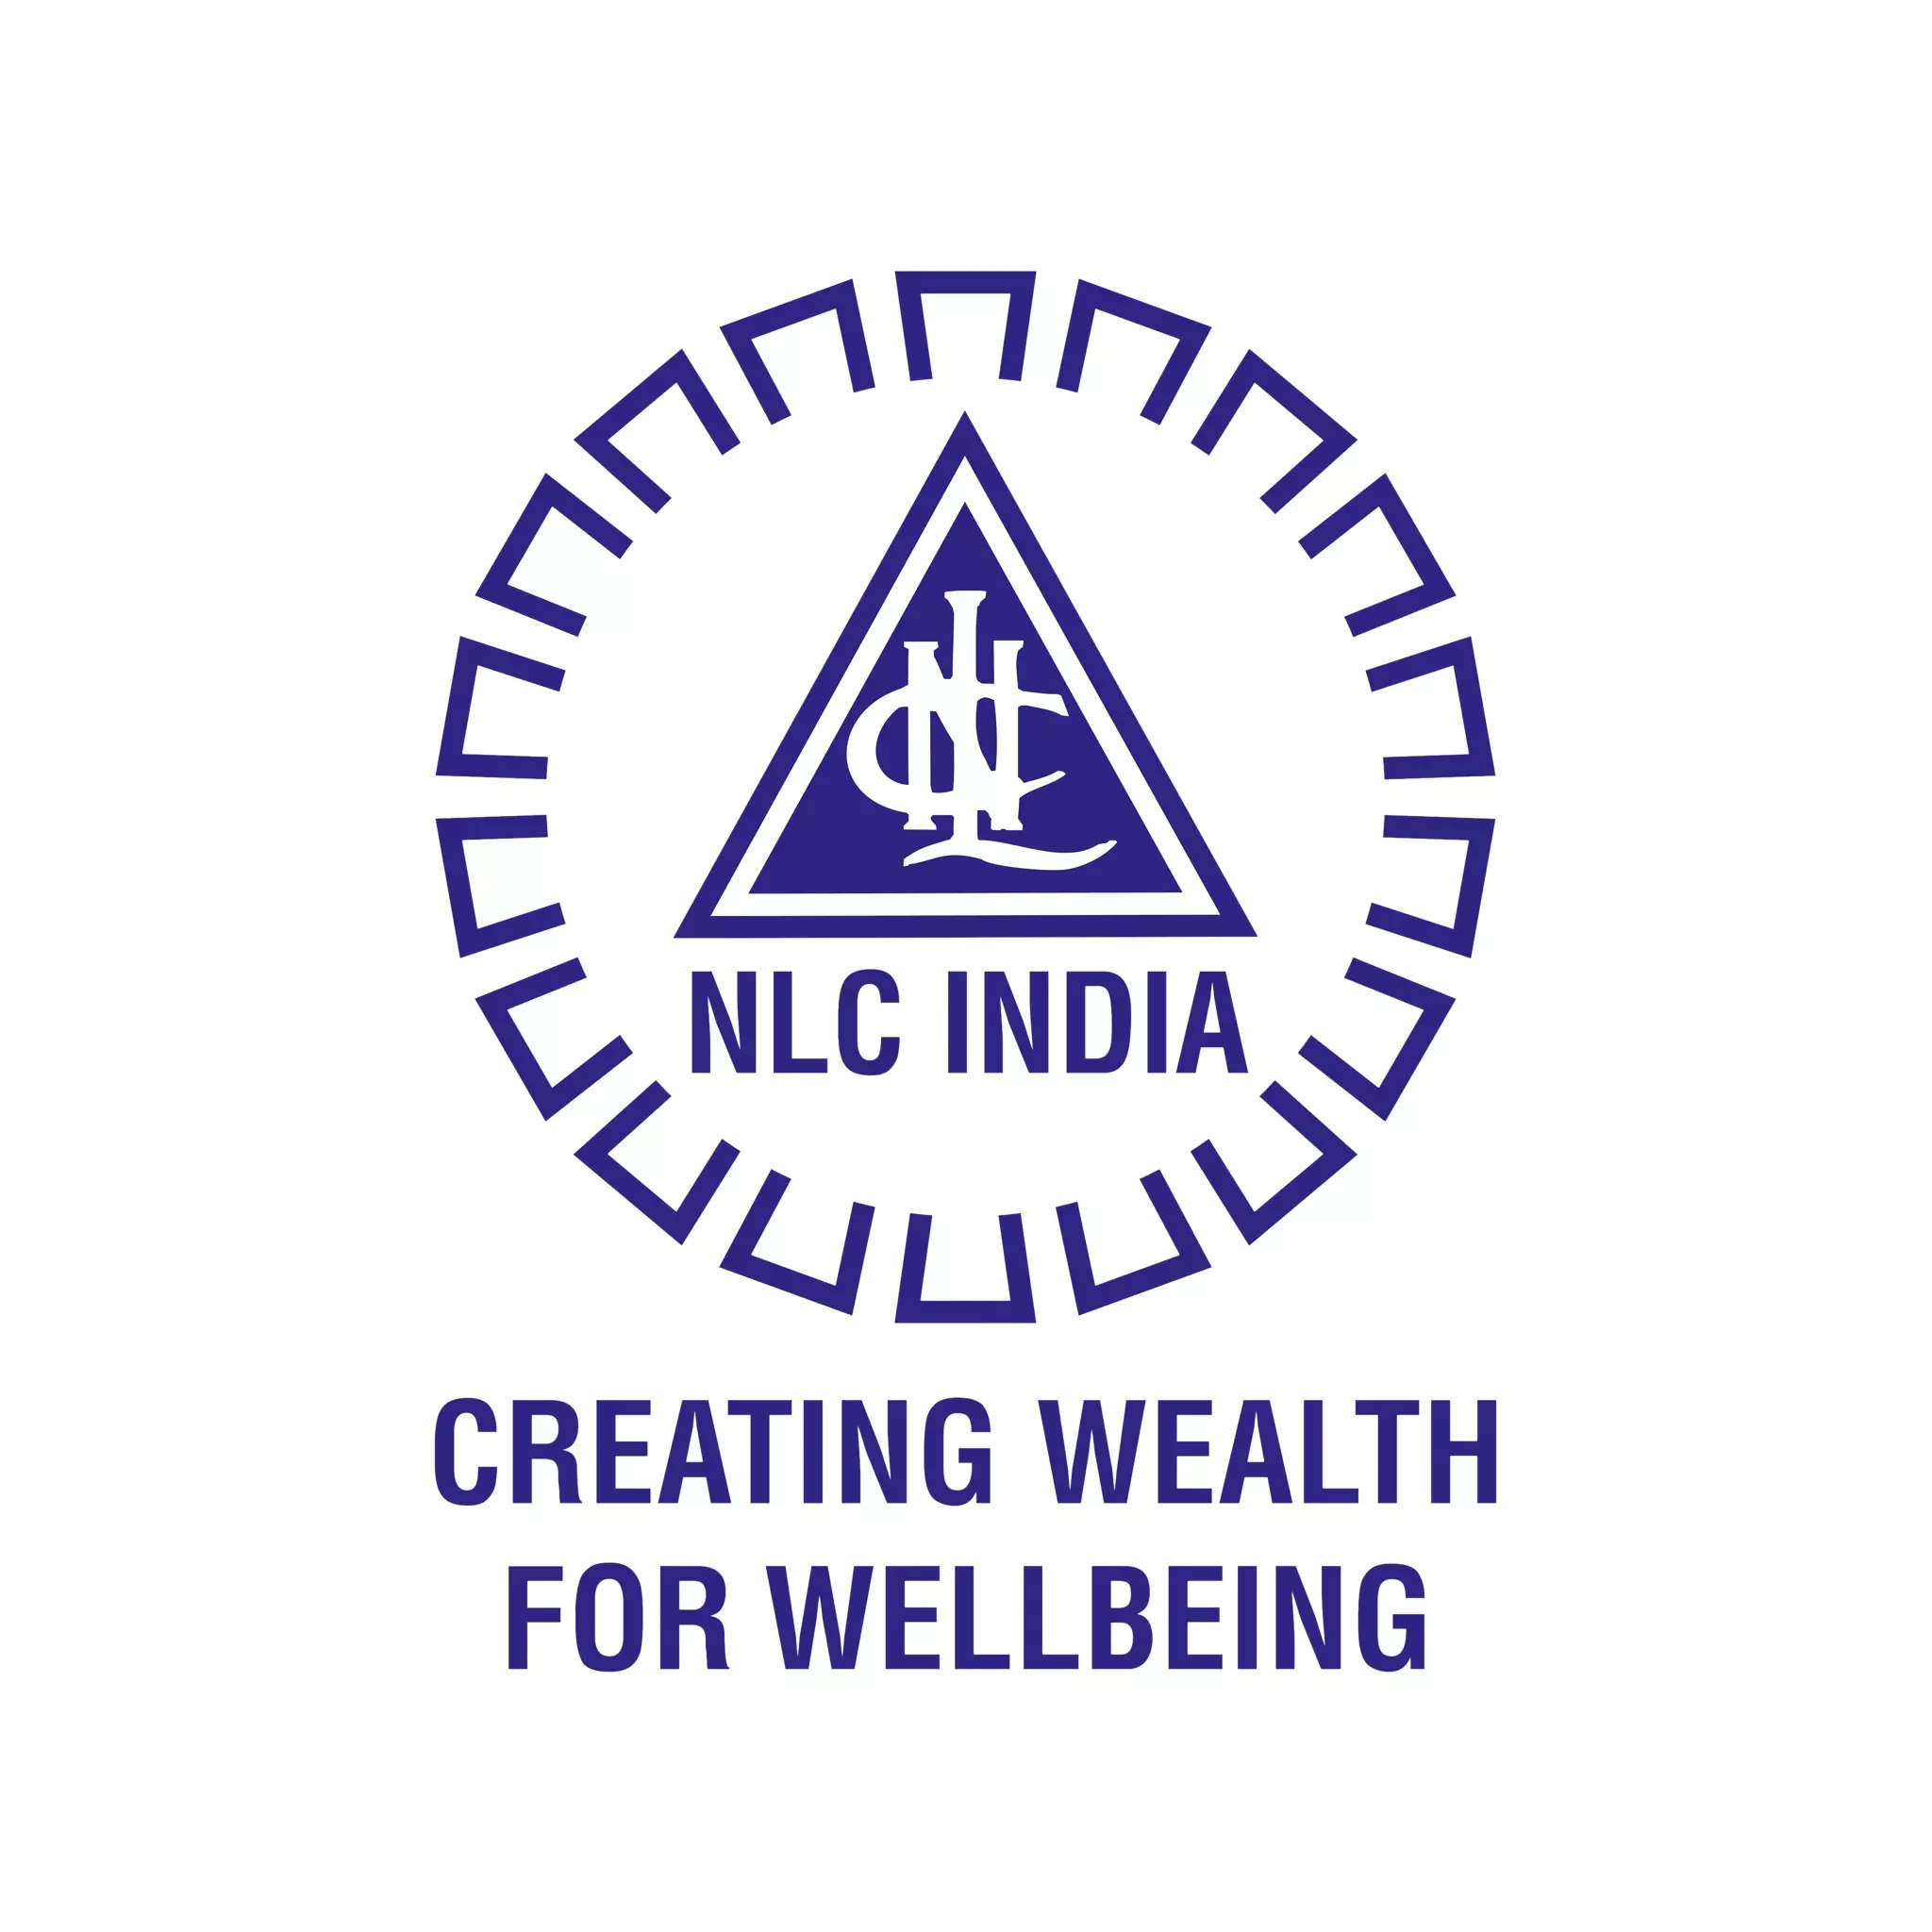 Axis Securities initiates coverage on NLC India, sees upside potential of 15% 